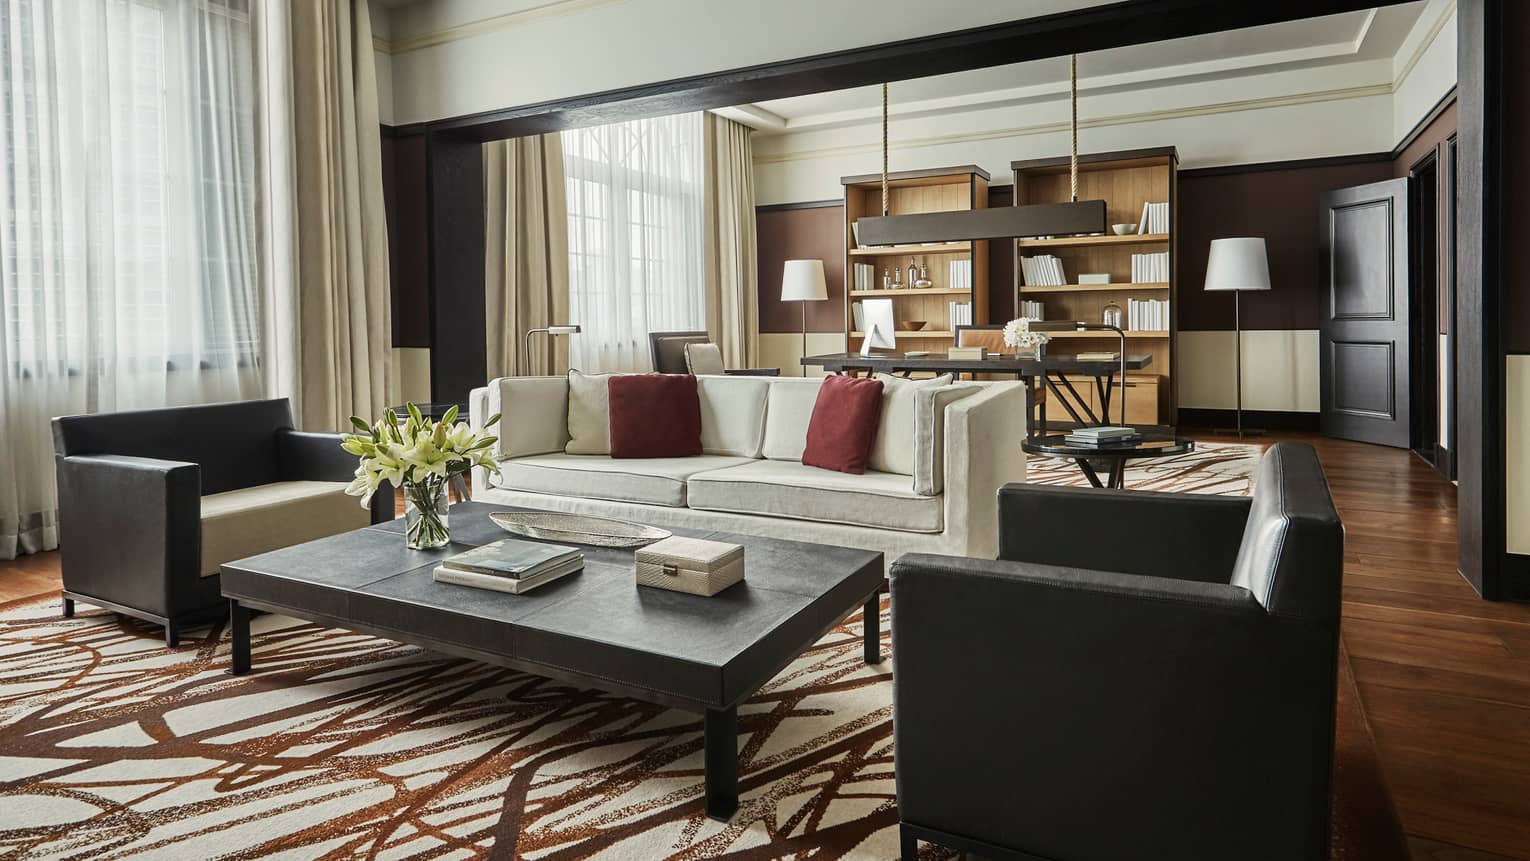 Bright Governor Suite sofa and two armchairs by coffee table, brown-and-white rug